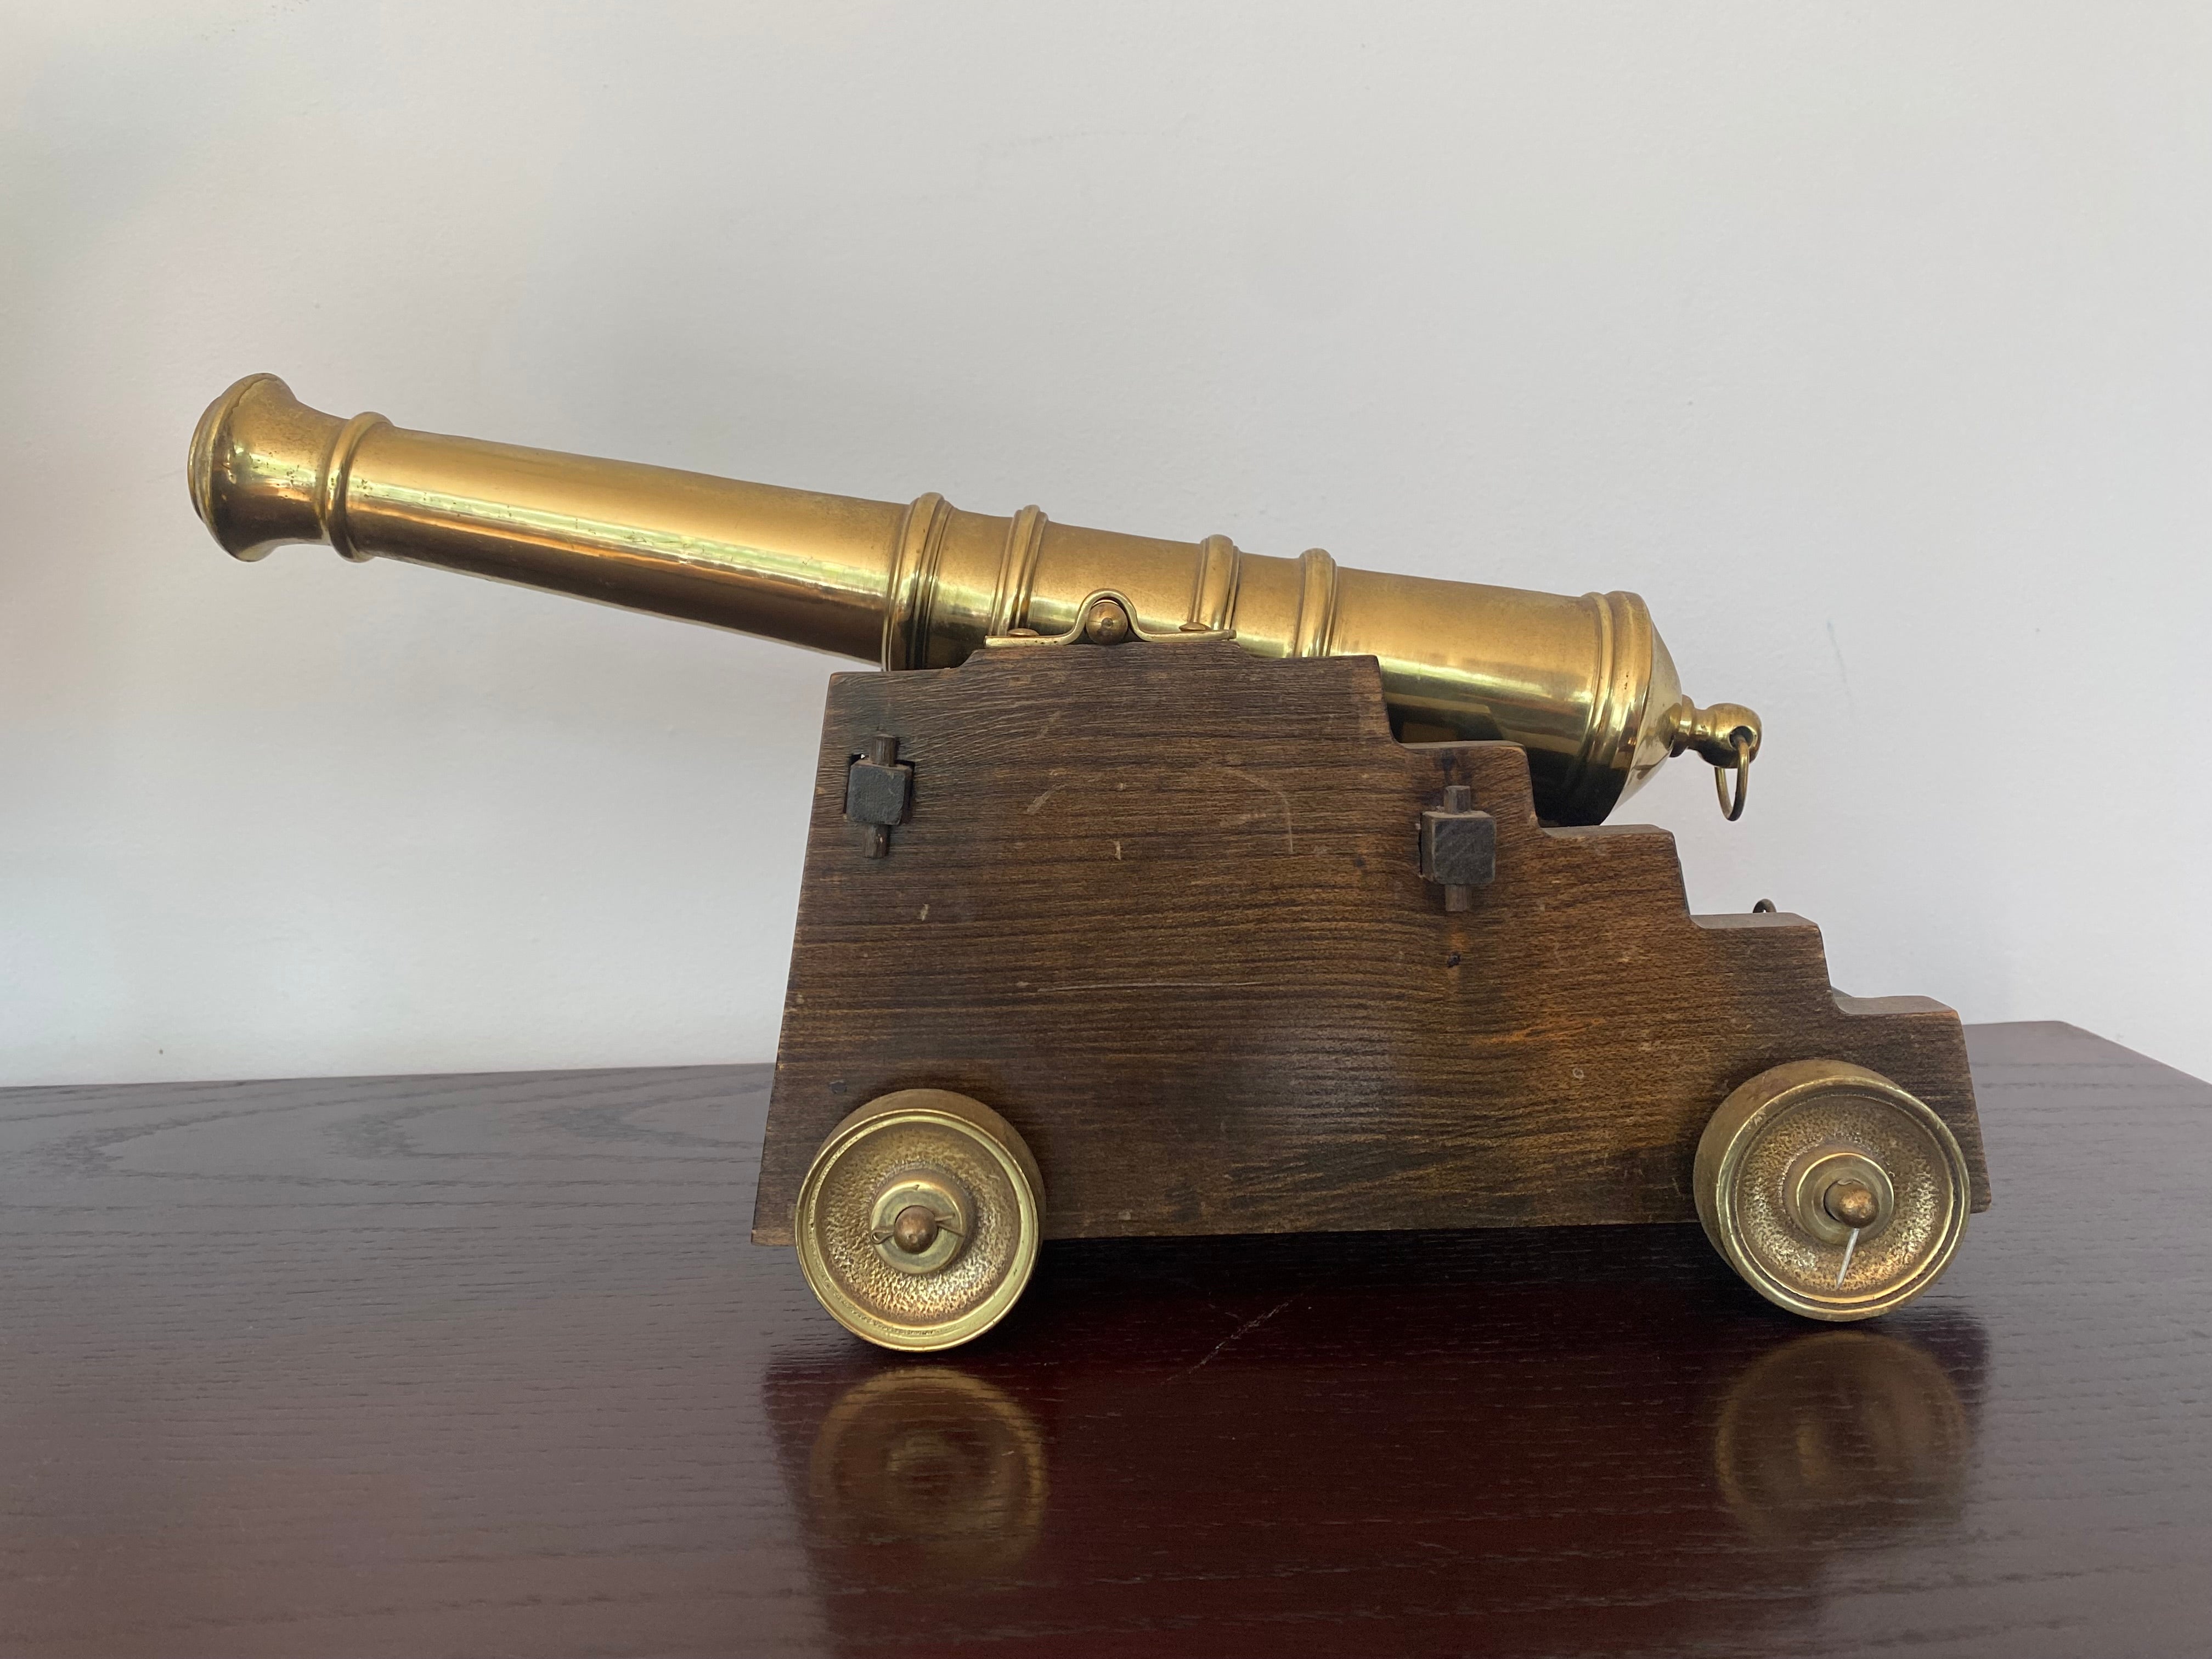 Vintage, mid 20th century, brass signal Cannon with wood base.